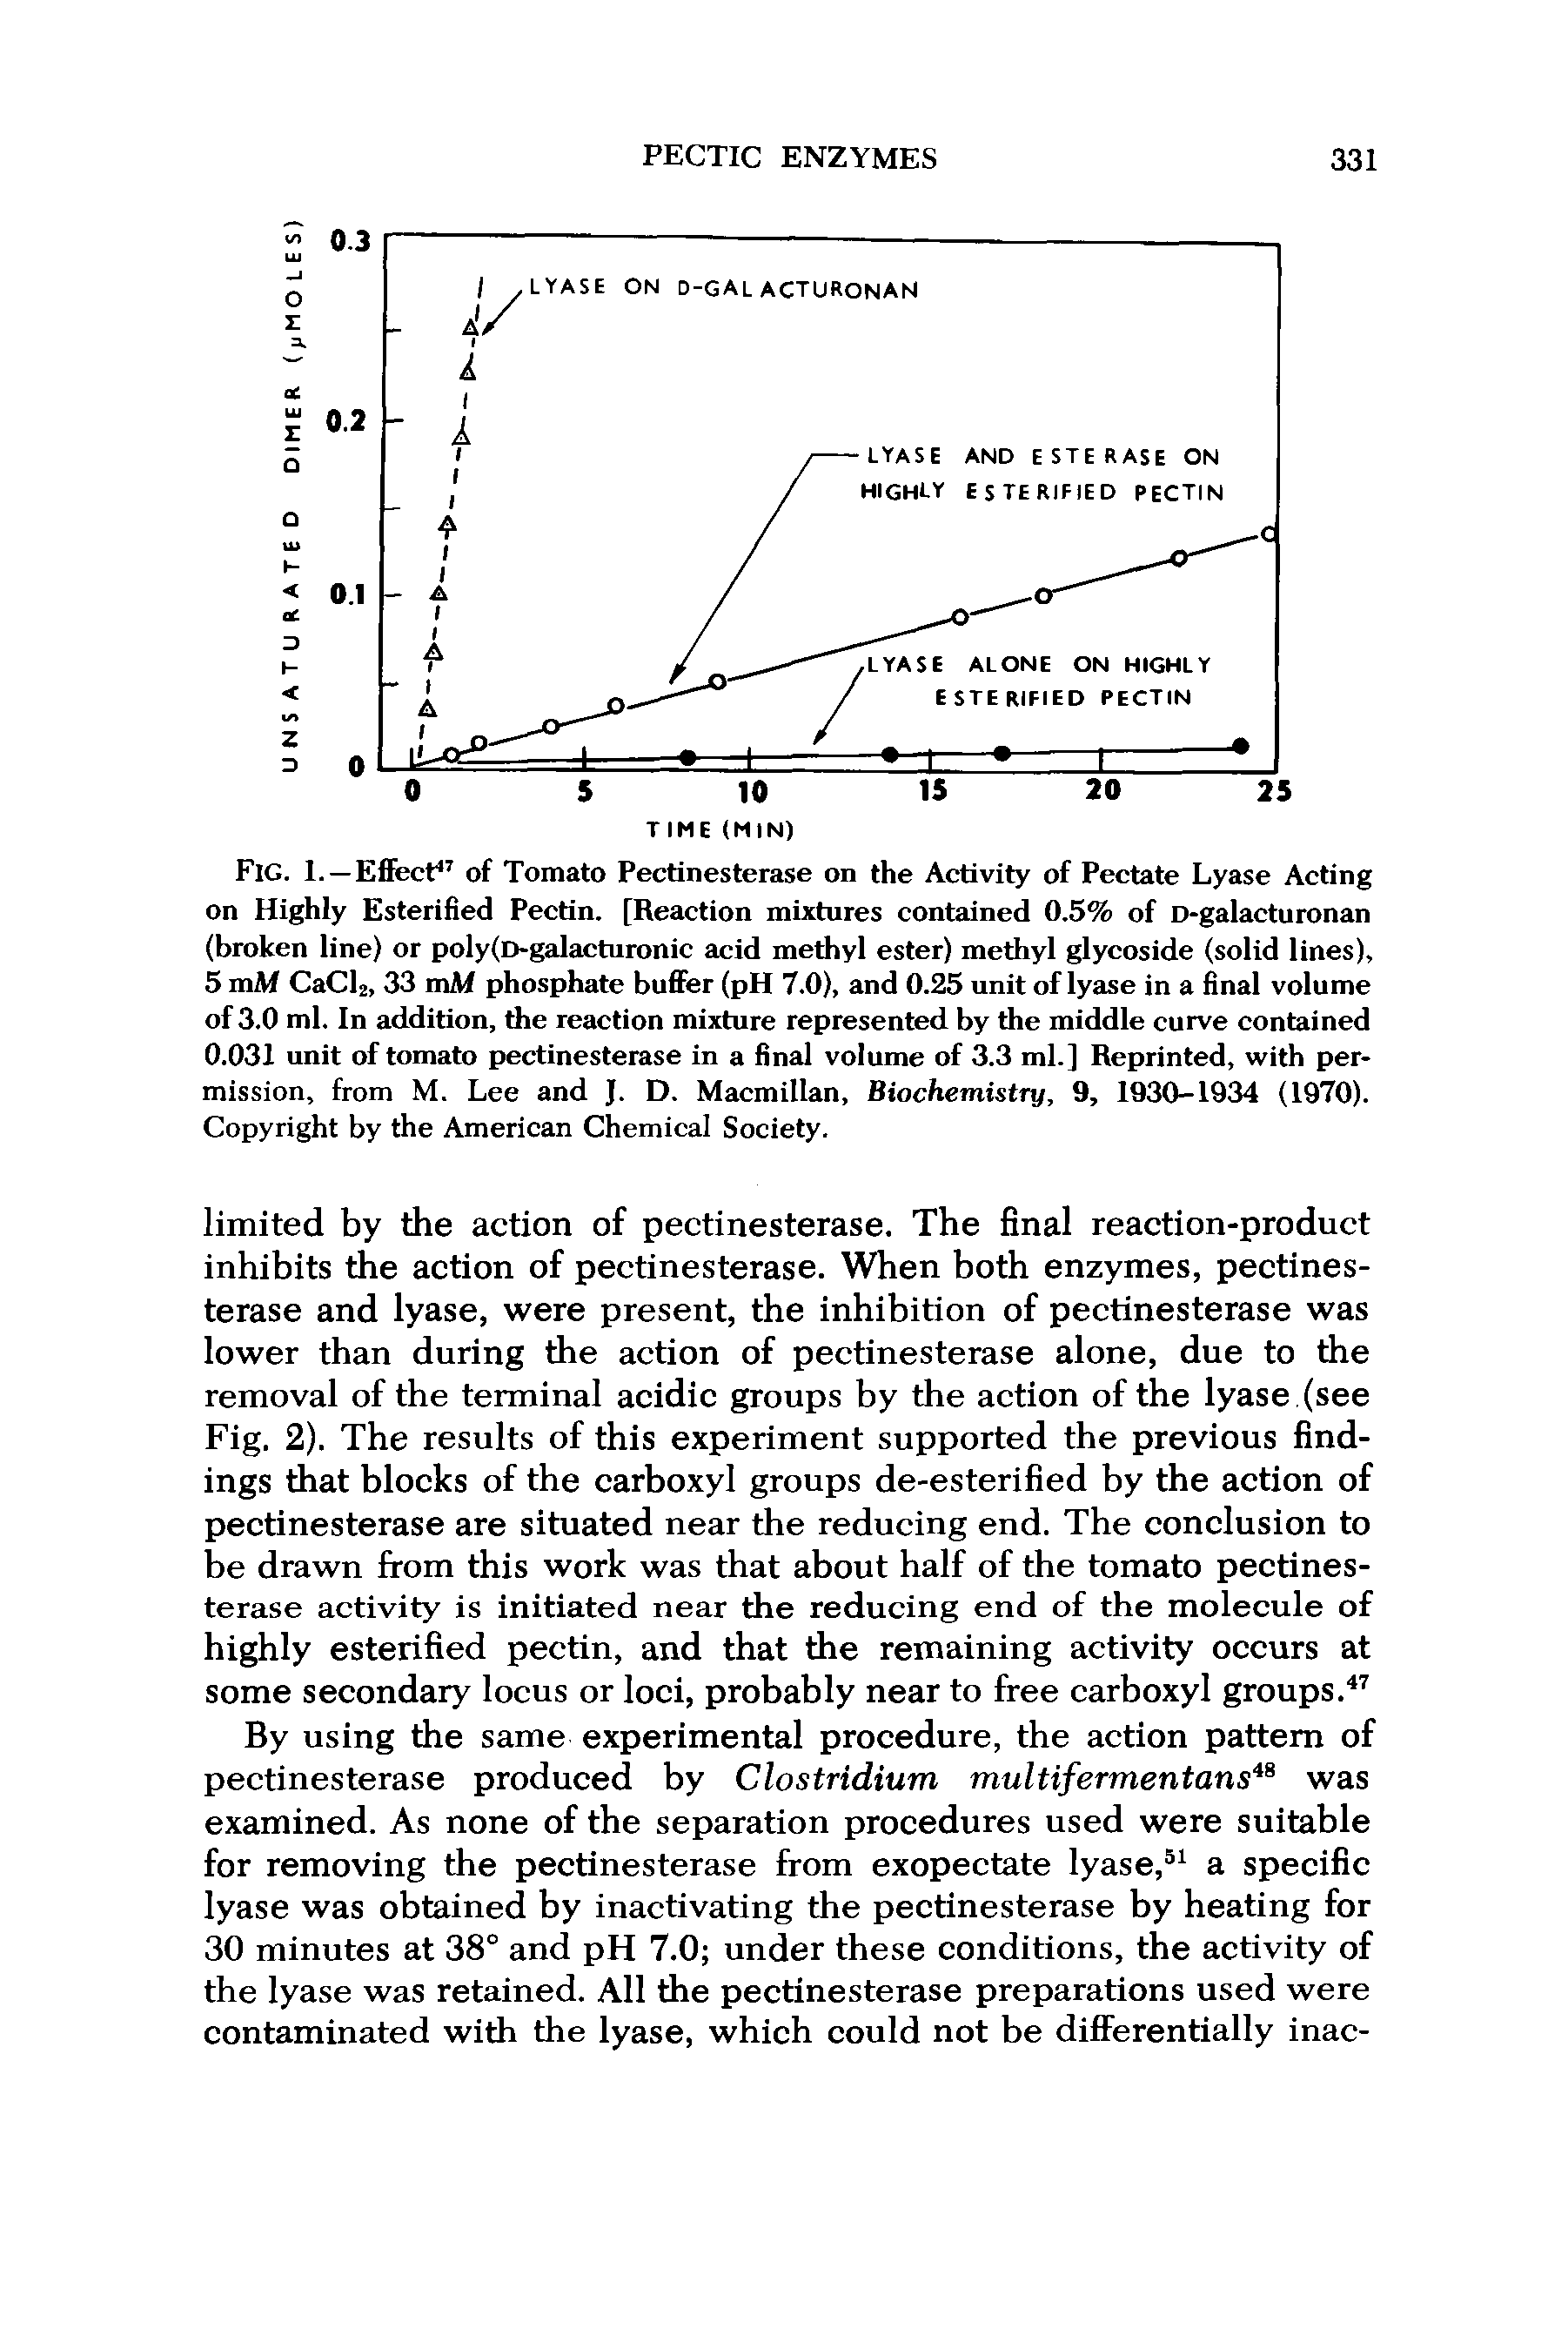 Fig. 1. — Effect47 of Tomato Pectinesterase on the Activity of Pectate Lyase Acting on Highly Esterified Pectin. [Reaction mixtures contained 0.5% of D-galacturonan (broken line) or poly(D-galacturonic acid methyl ester) methyl glycoside (solid lines), 5 mM CaCl2, 33 mM phosphate buflFer (pH 7.0), and 0.25 unit of lyase in a final volume of 3.0 ml. In addition, the reaction mixture represented by the middle curve contained 0.031 unit of tomato pectinesterase in a final volume of 3.3 ml.] Reprinted, with permission, from M. Lee and J. D. Macmillan, Biochemistry, 9, 1930-1934 (1970). Copyright by the American Chemical Society.